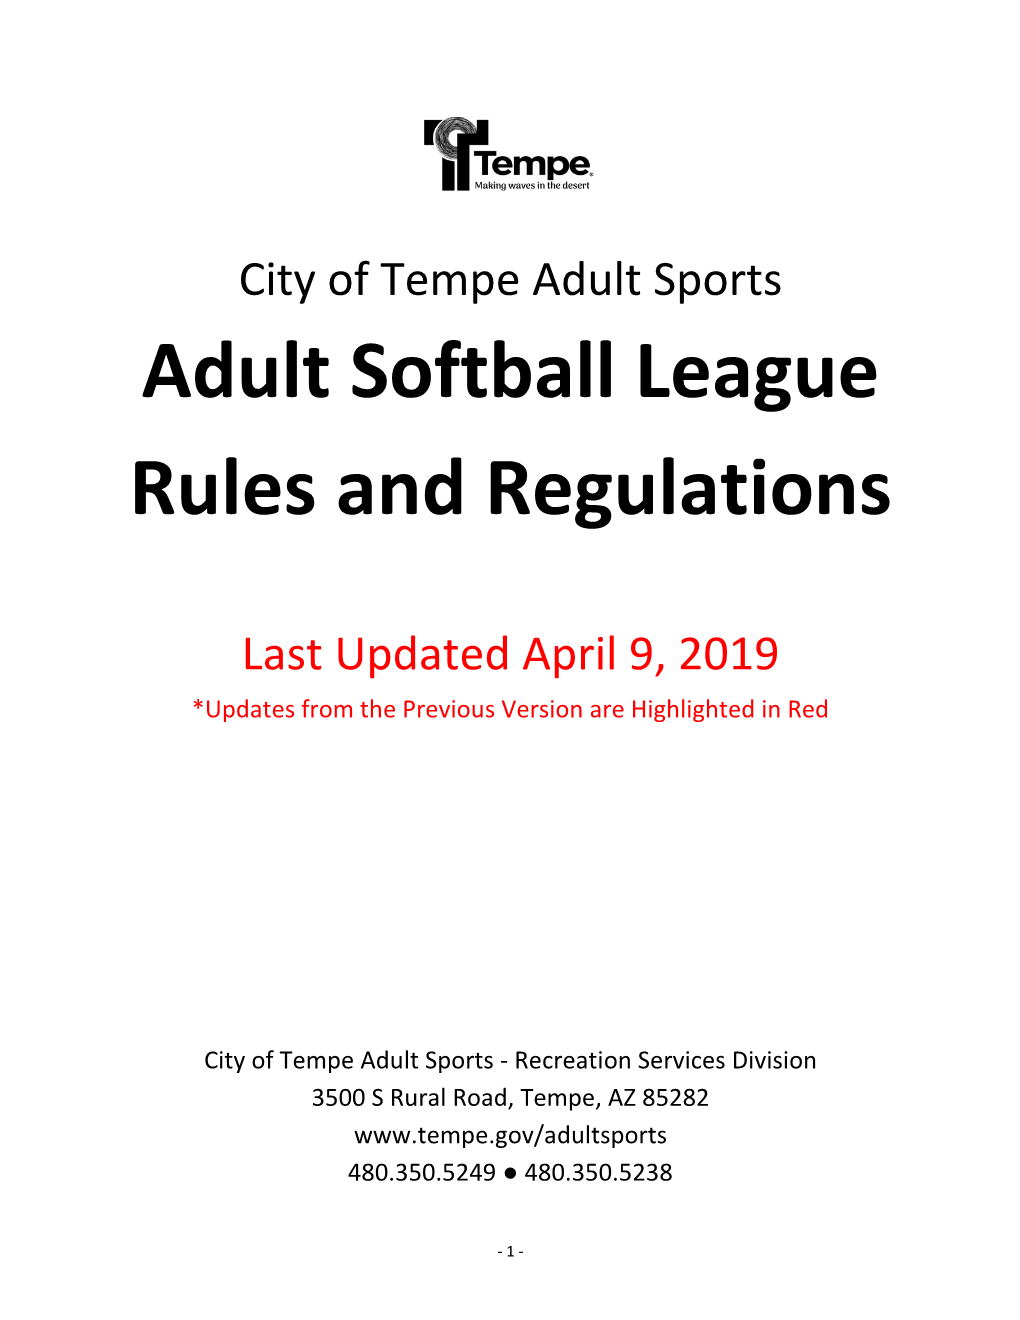 Adult Softball League Rules and Regulations